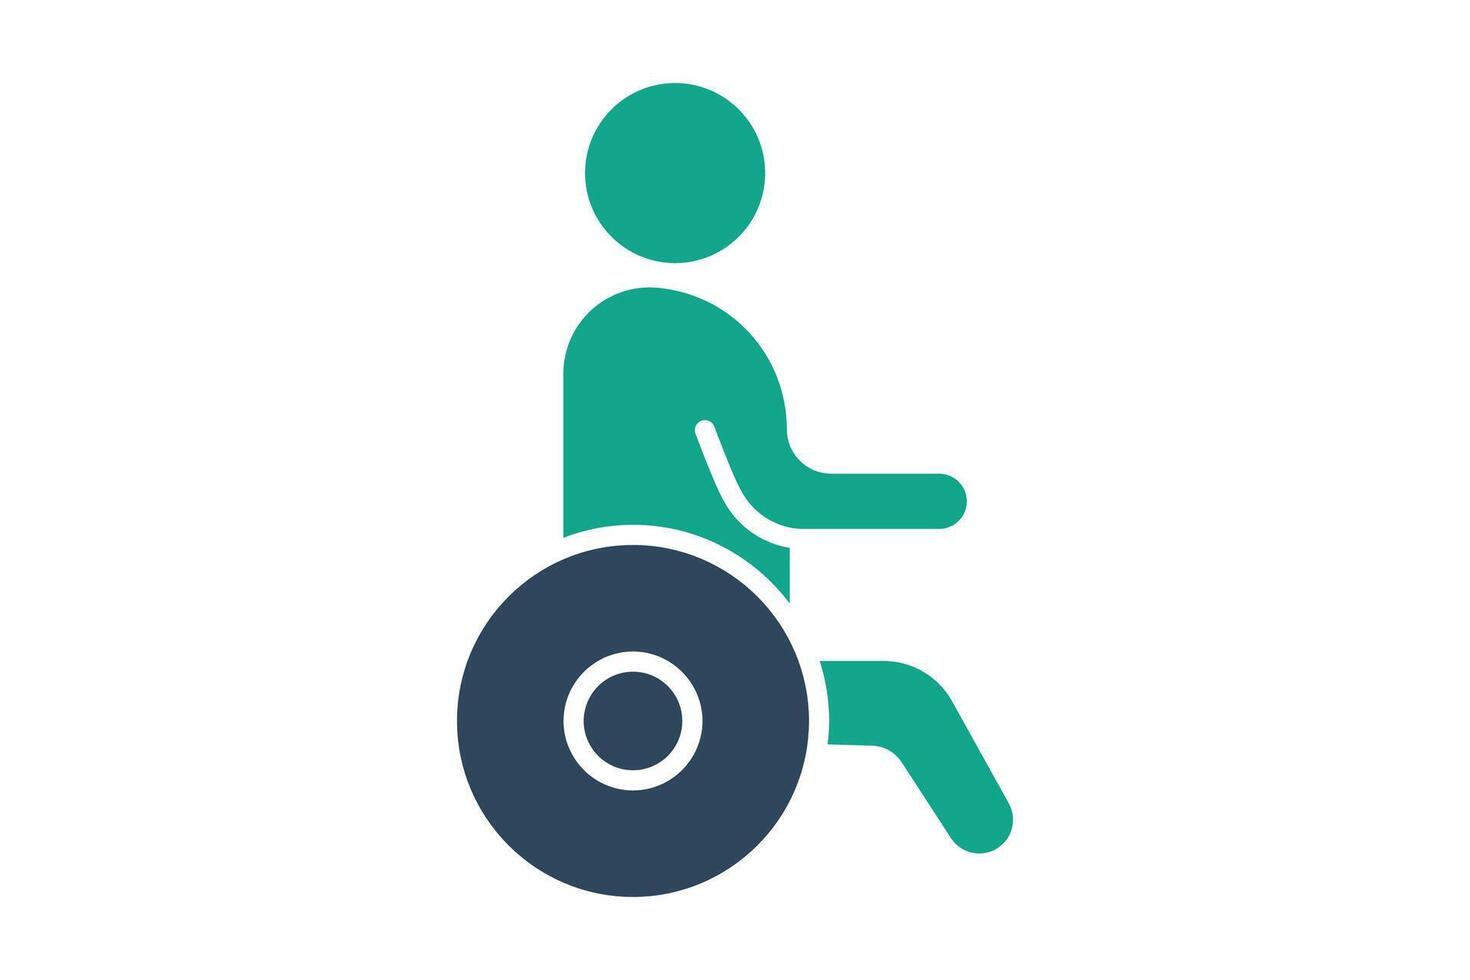 handicapped icon. people use wheelchairs. icon related to elderly. solid icon style. old age element illustration vector